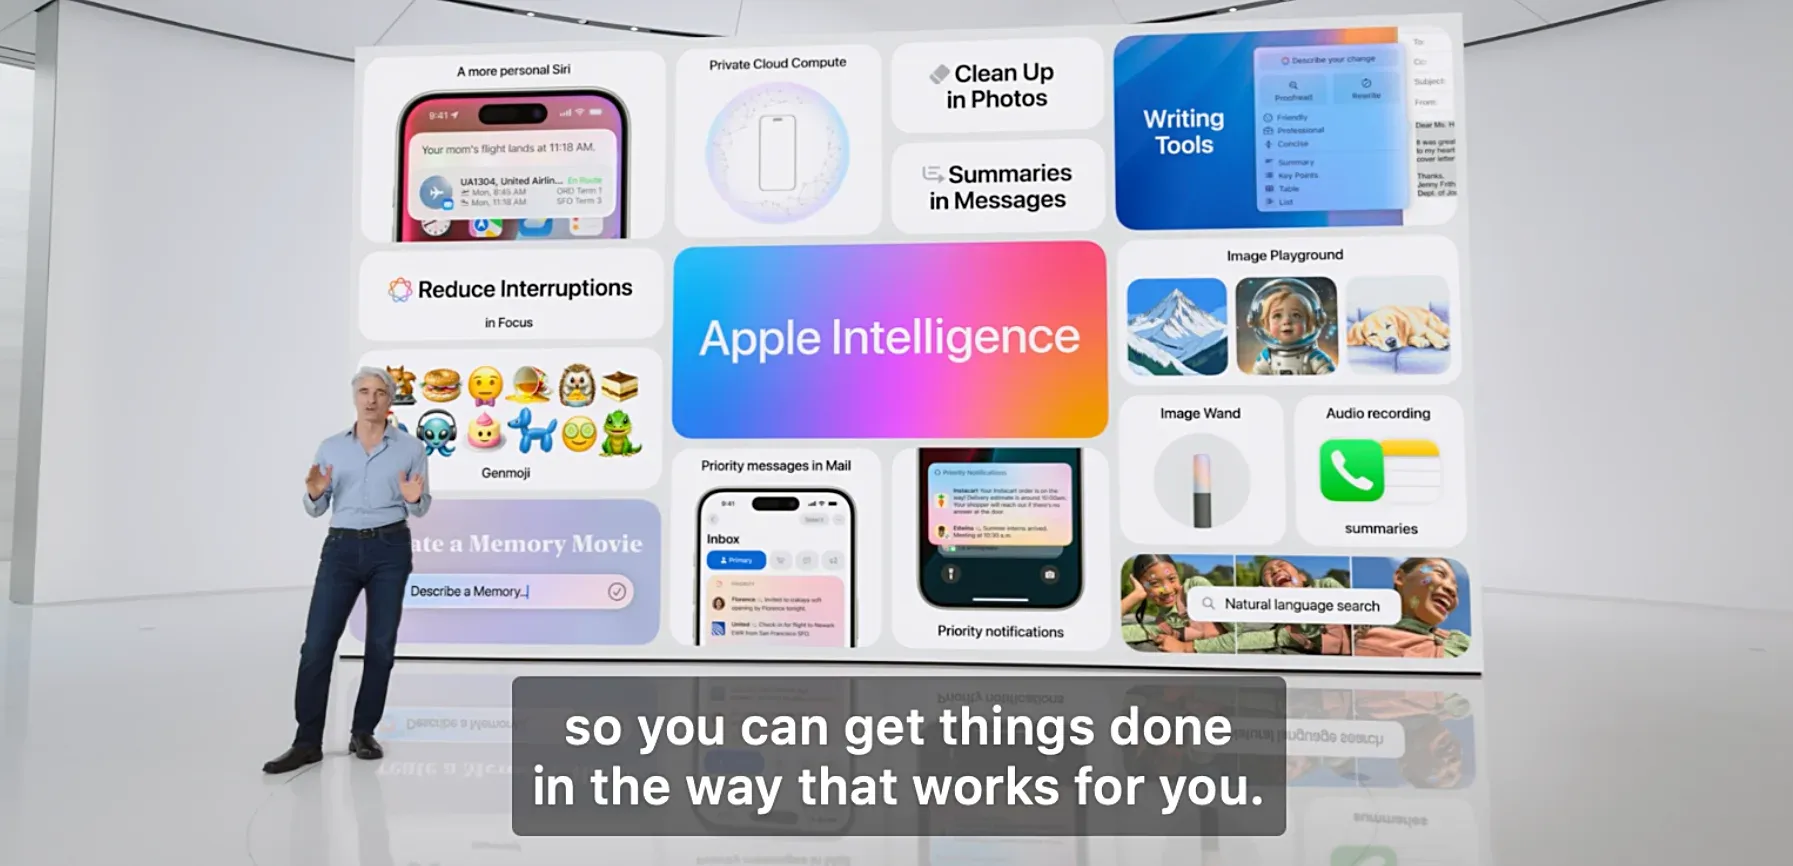 Apple Intelligence - A more personal Siri. Private Cloud Compute. Clean Up in Photos. Writing Tools. Summaries in Messages, Genmoji, Image Playground, Priority messages in Mail, Describe a Memory, Natural language search.